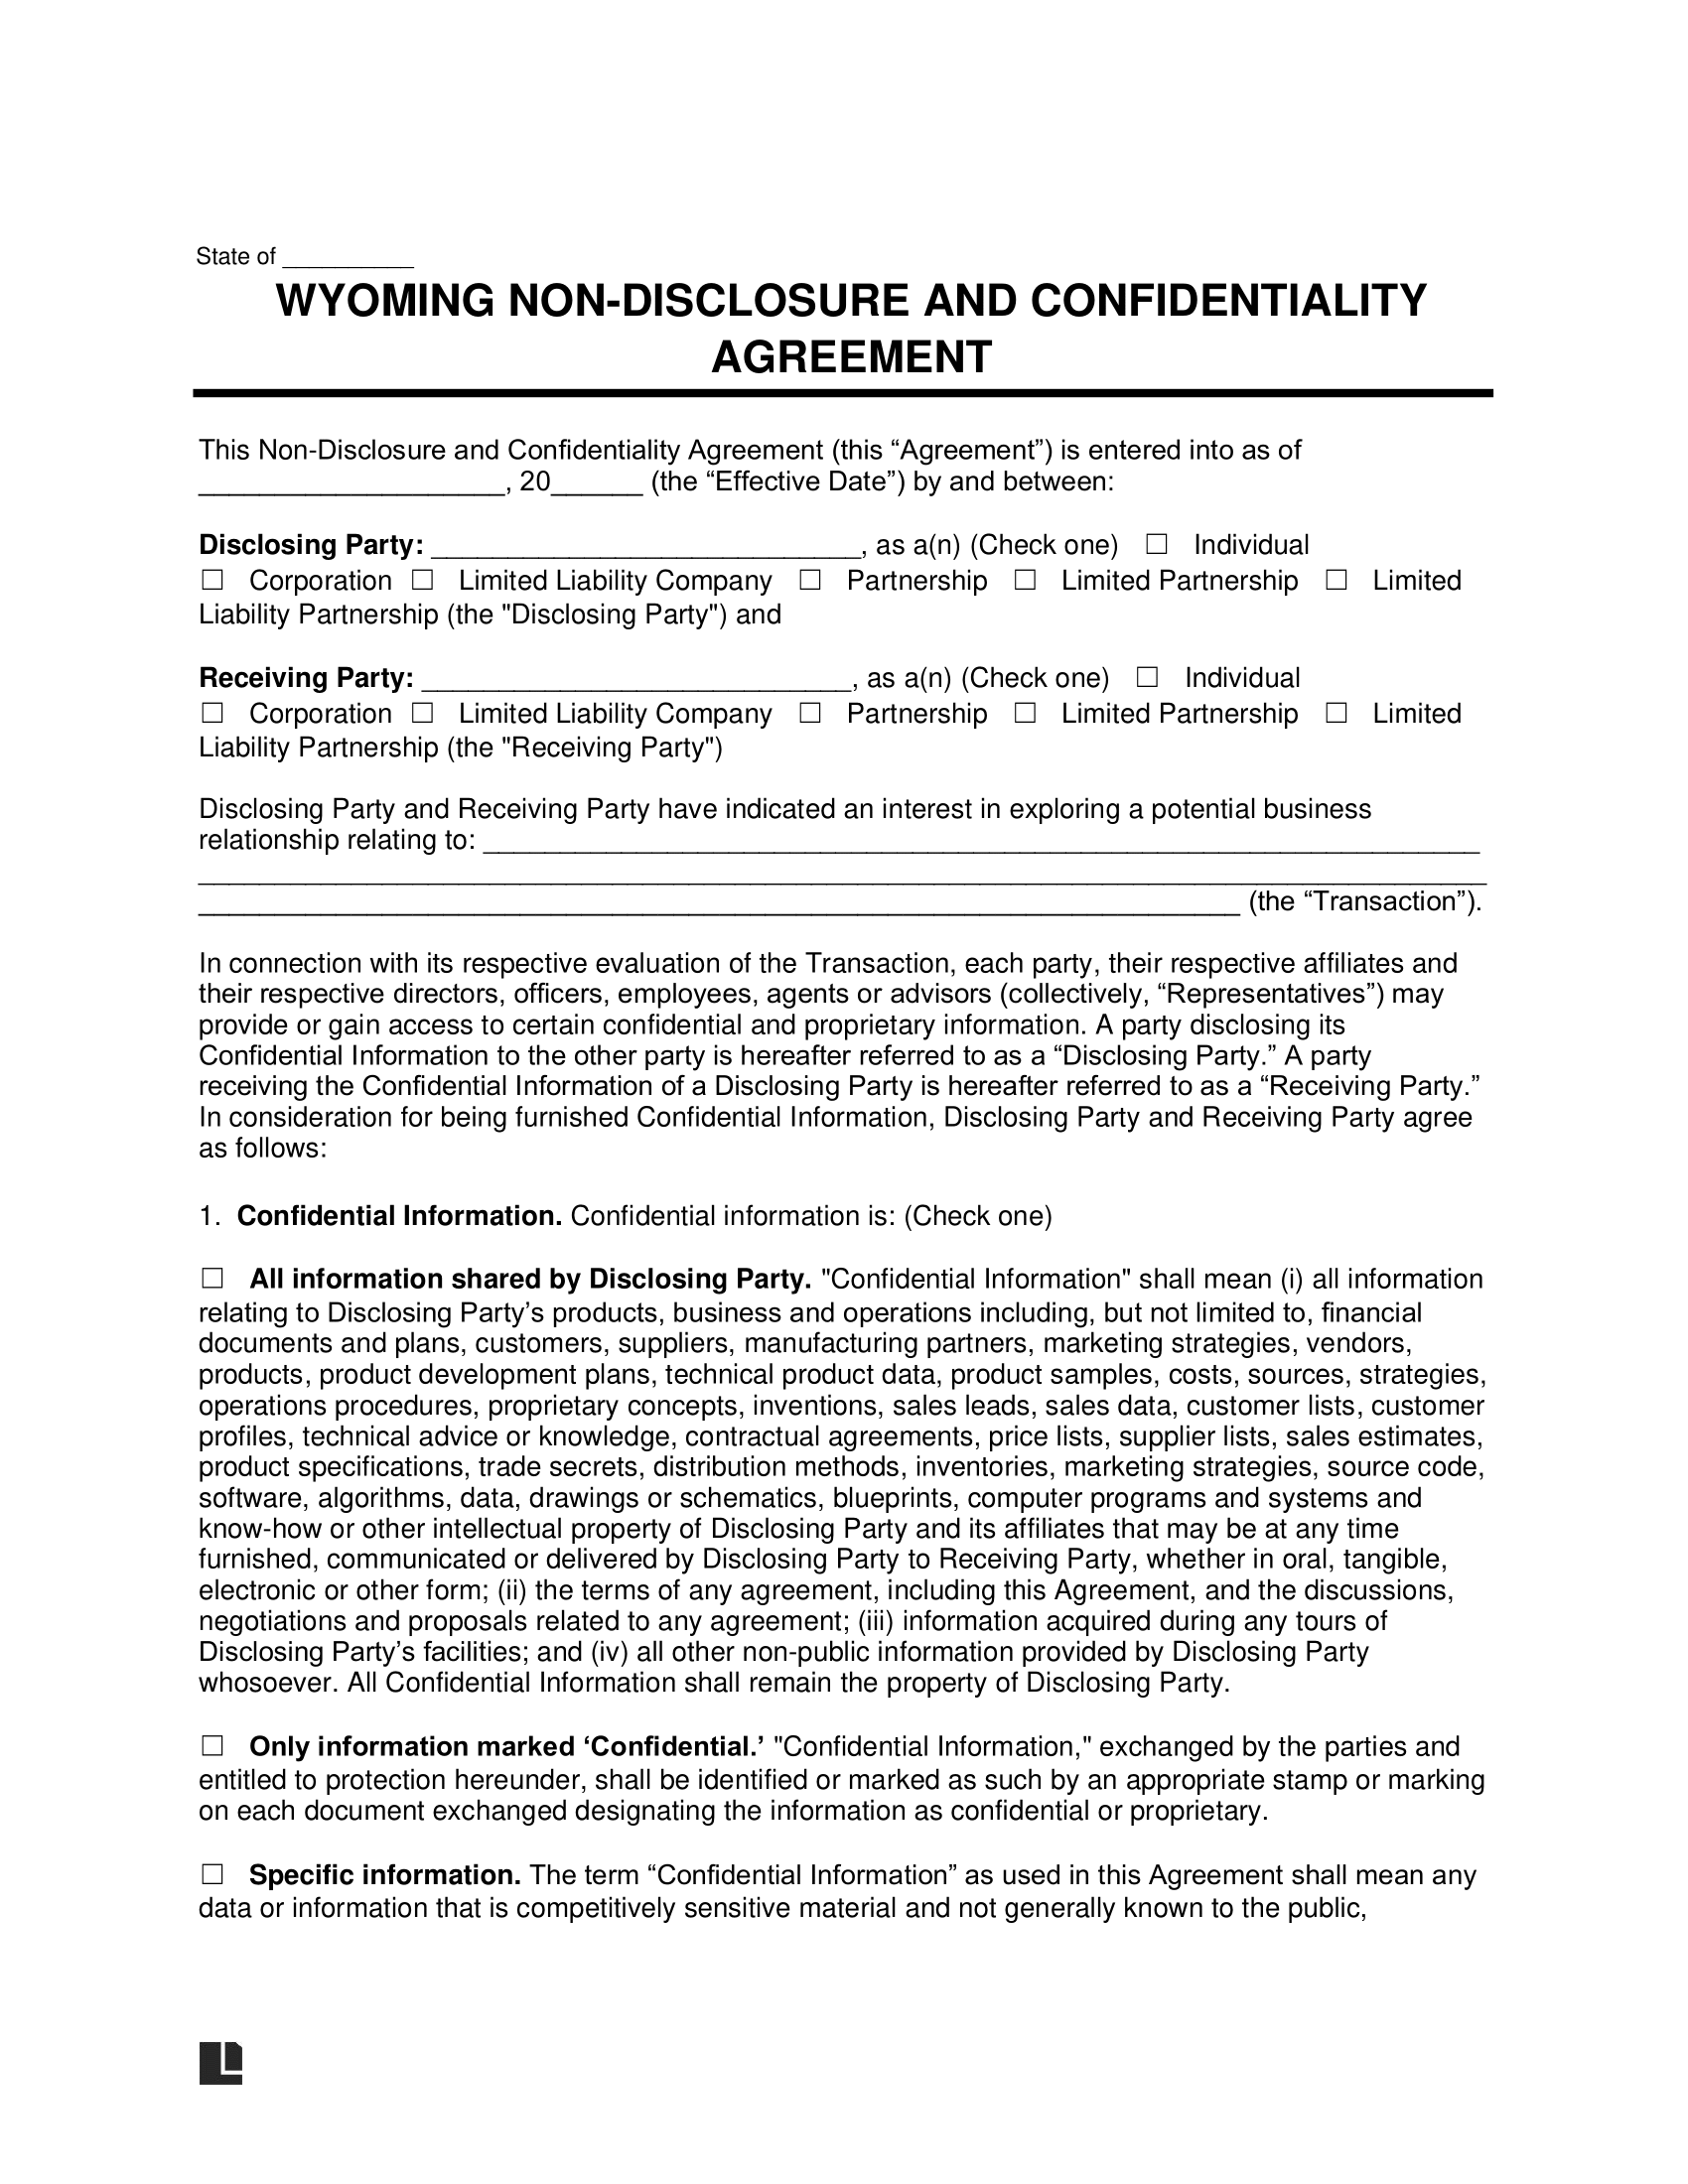 Wyoming Non-Disclosure and Confidentiality Agreement Template